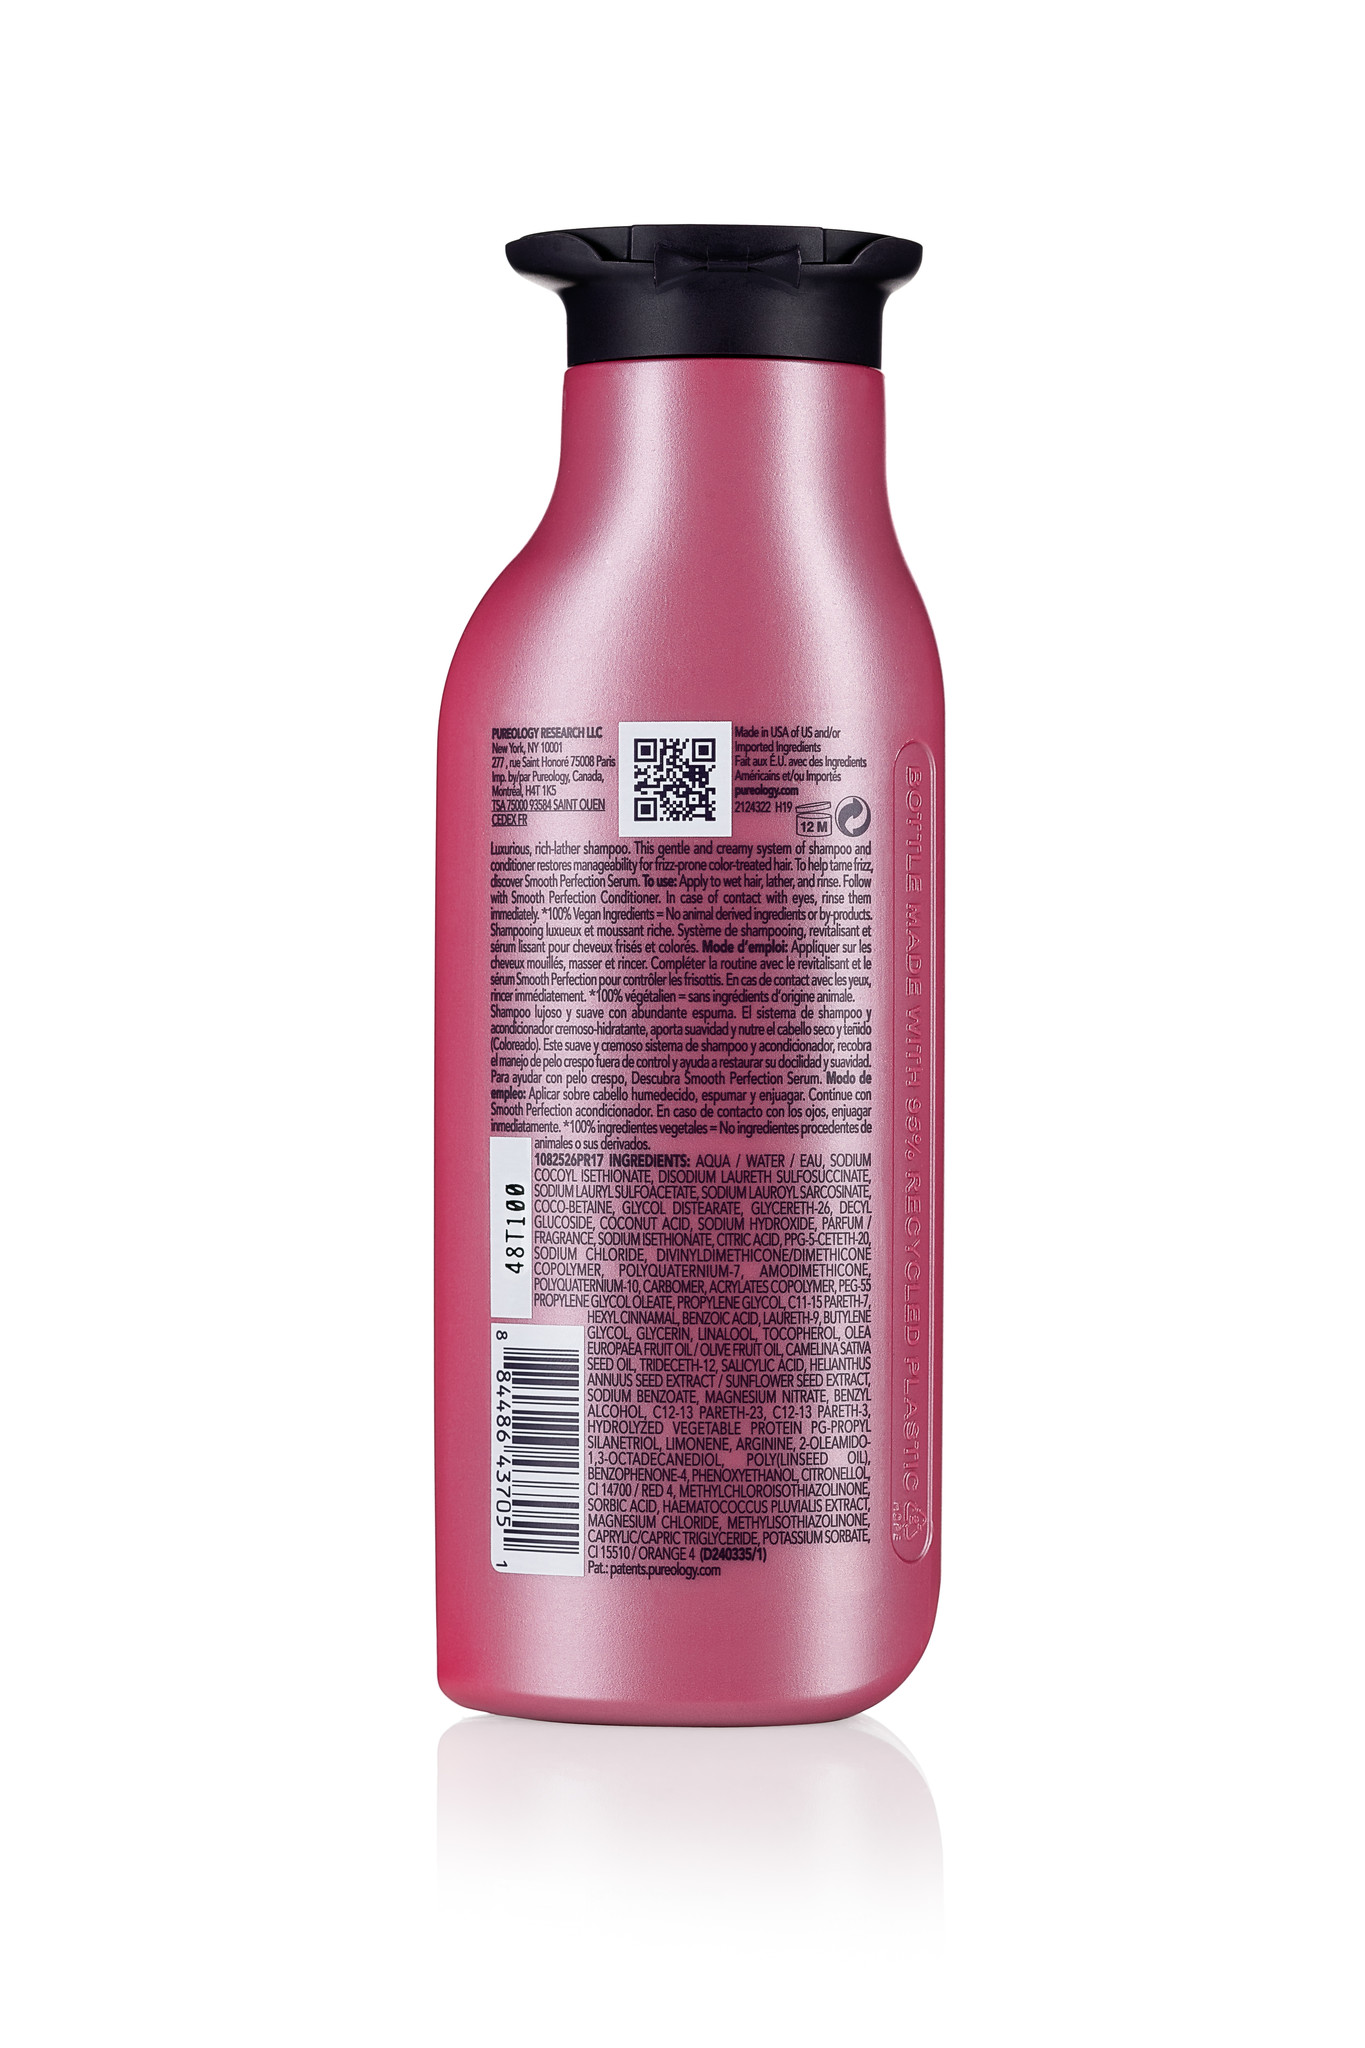 Pureology Smooth Perfection Shampoo | For Frizzy, Color-Treated Hair |  Smooths Hair & Controls Frizz | Sulfate-Free | Vegan